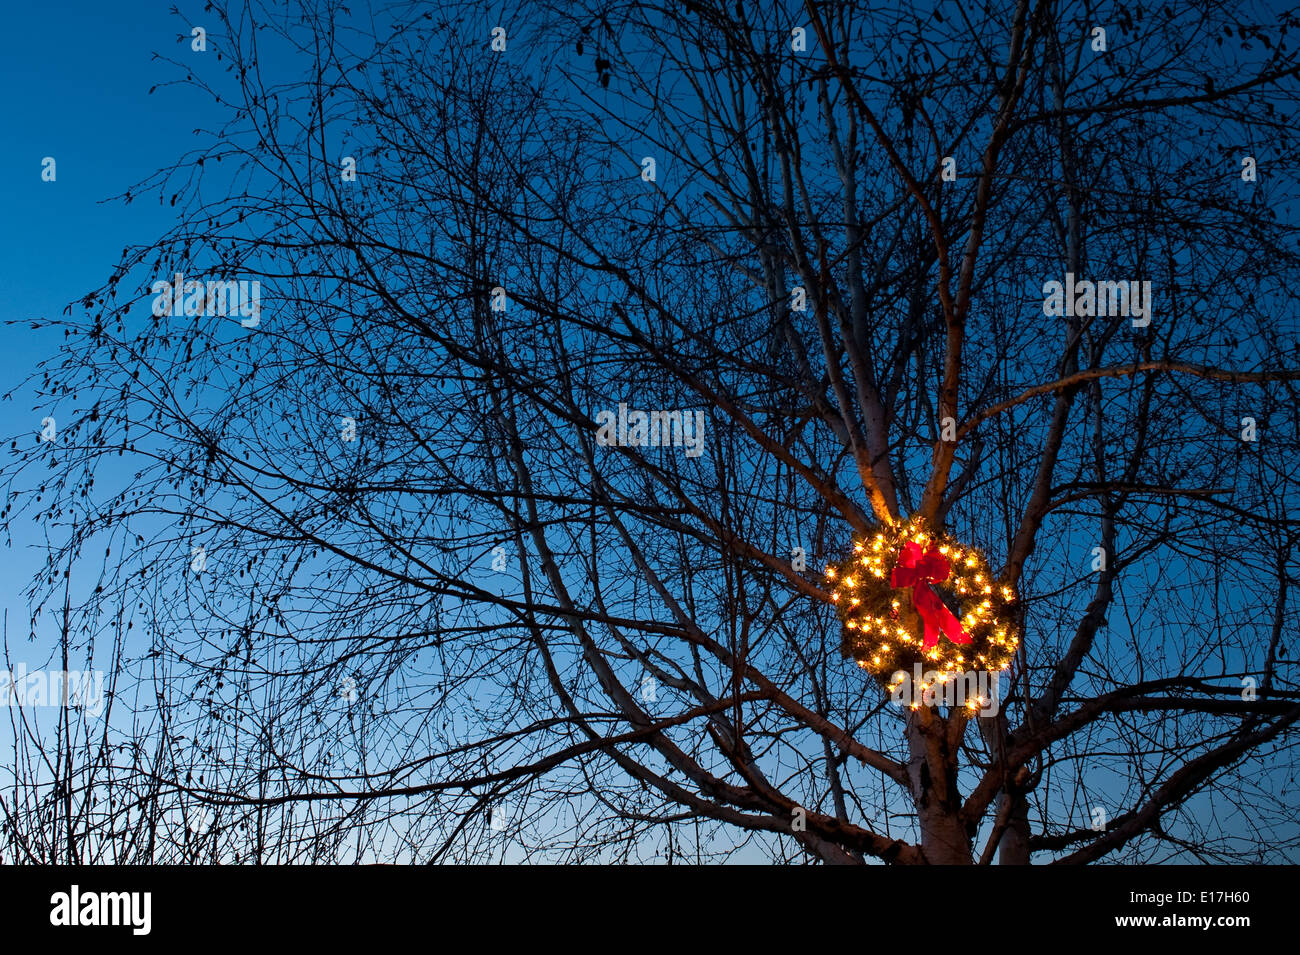 Lit Christmas wreath with red bow hanging in tree during the Holiday season Stock Photo